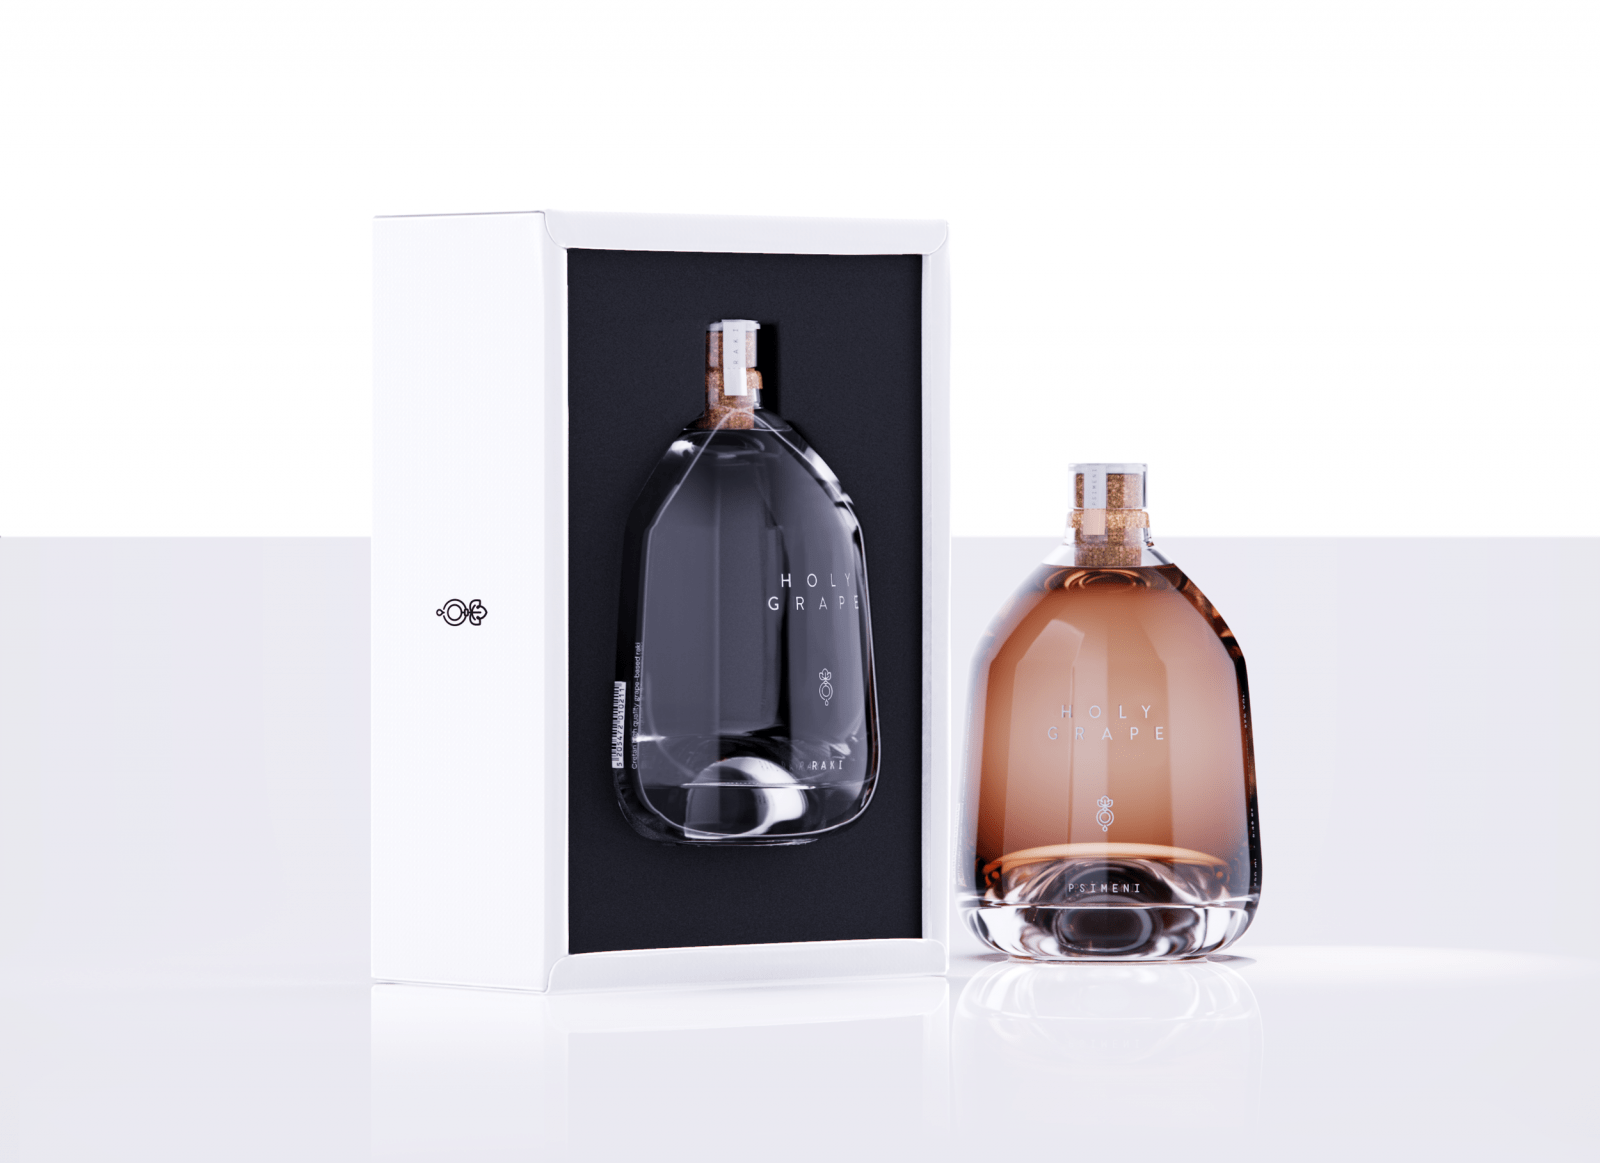 Minimal Bottle Design and Product Identity Design for Greek Alcoholic Liquor and Name Giving